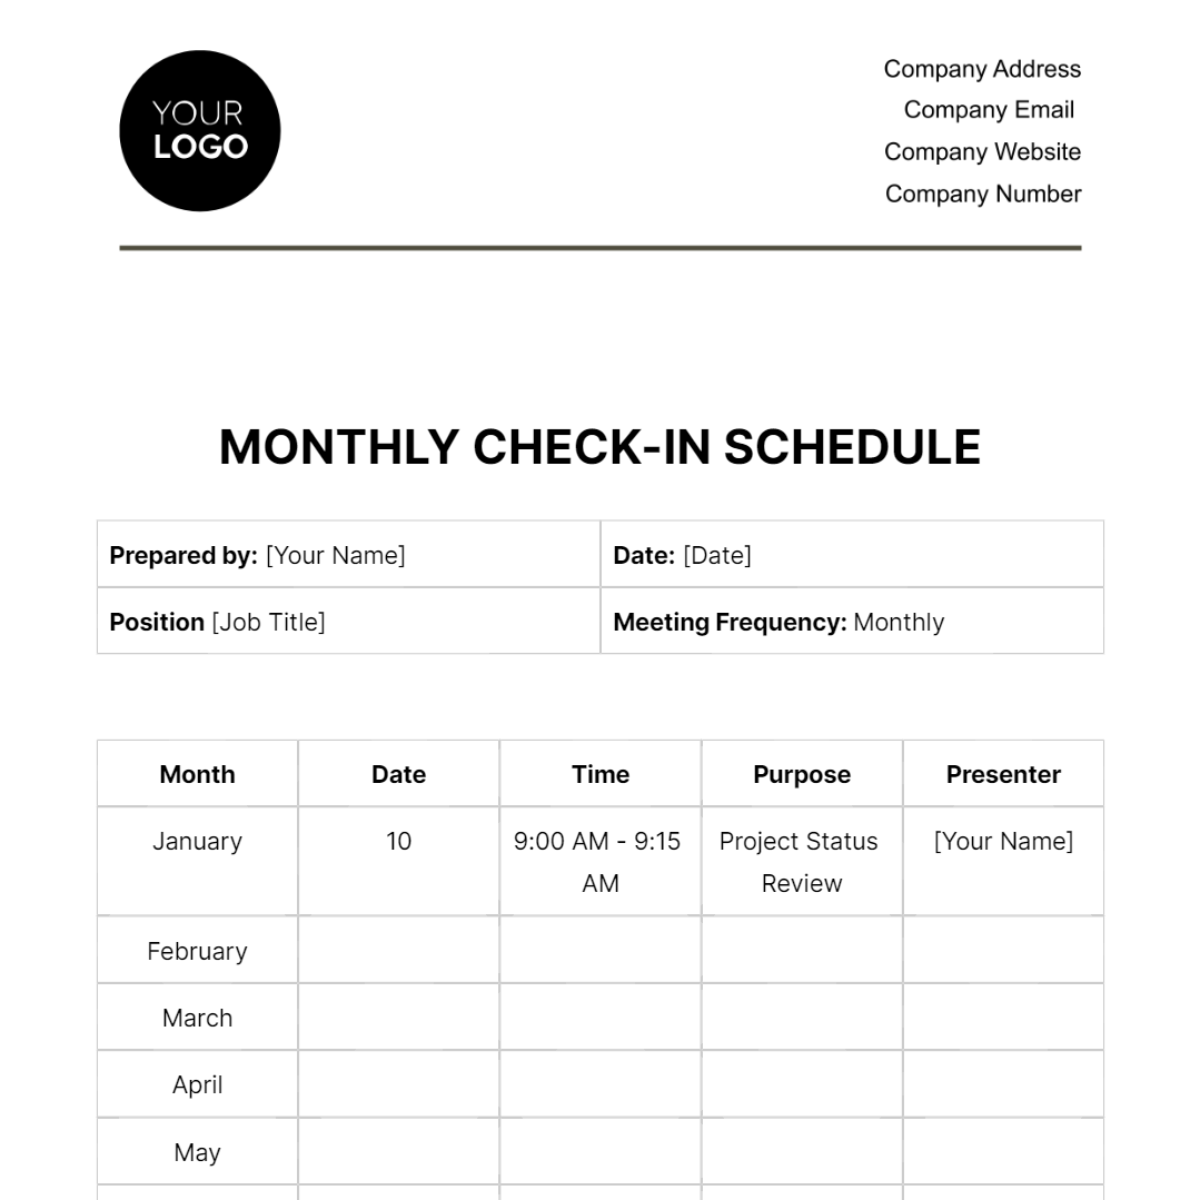 Monthly Check-in Schedule HR Template